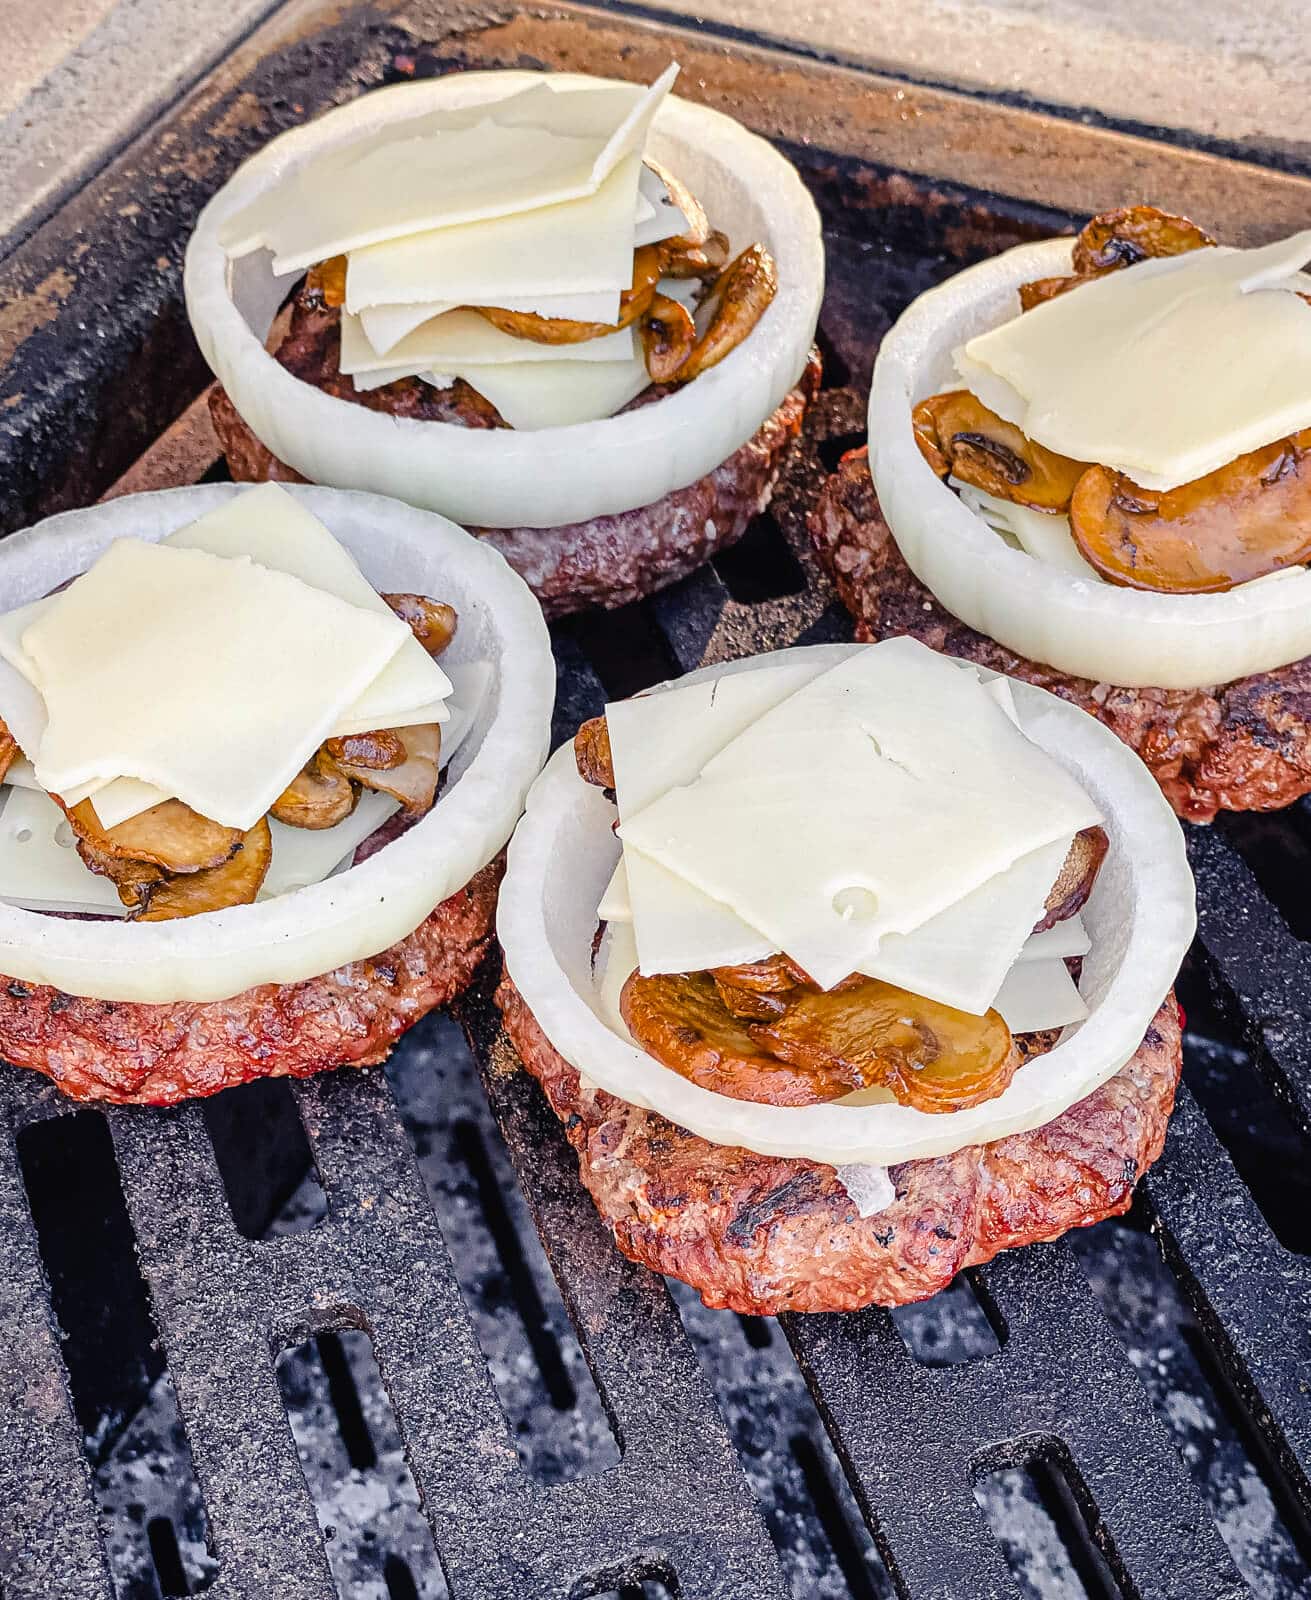 venison burgers topped with cheese and mushrooms